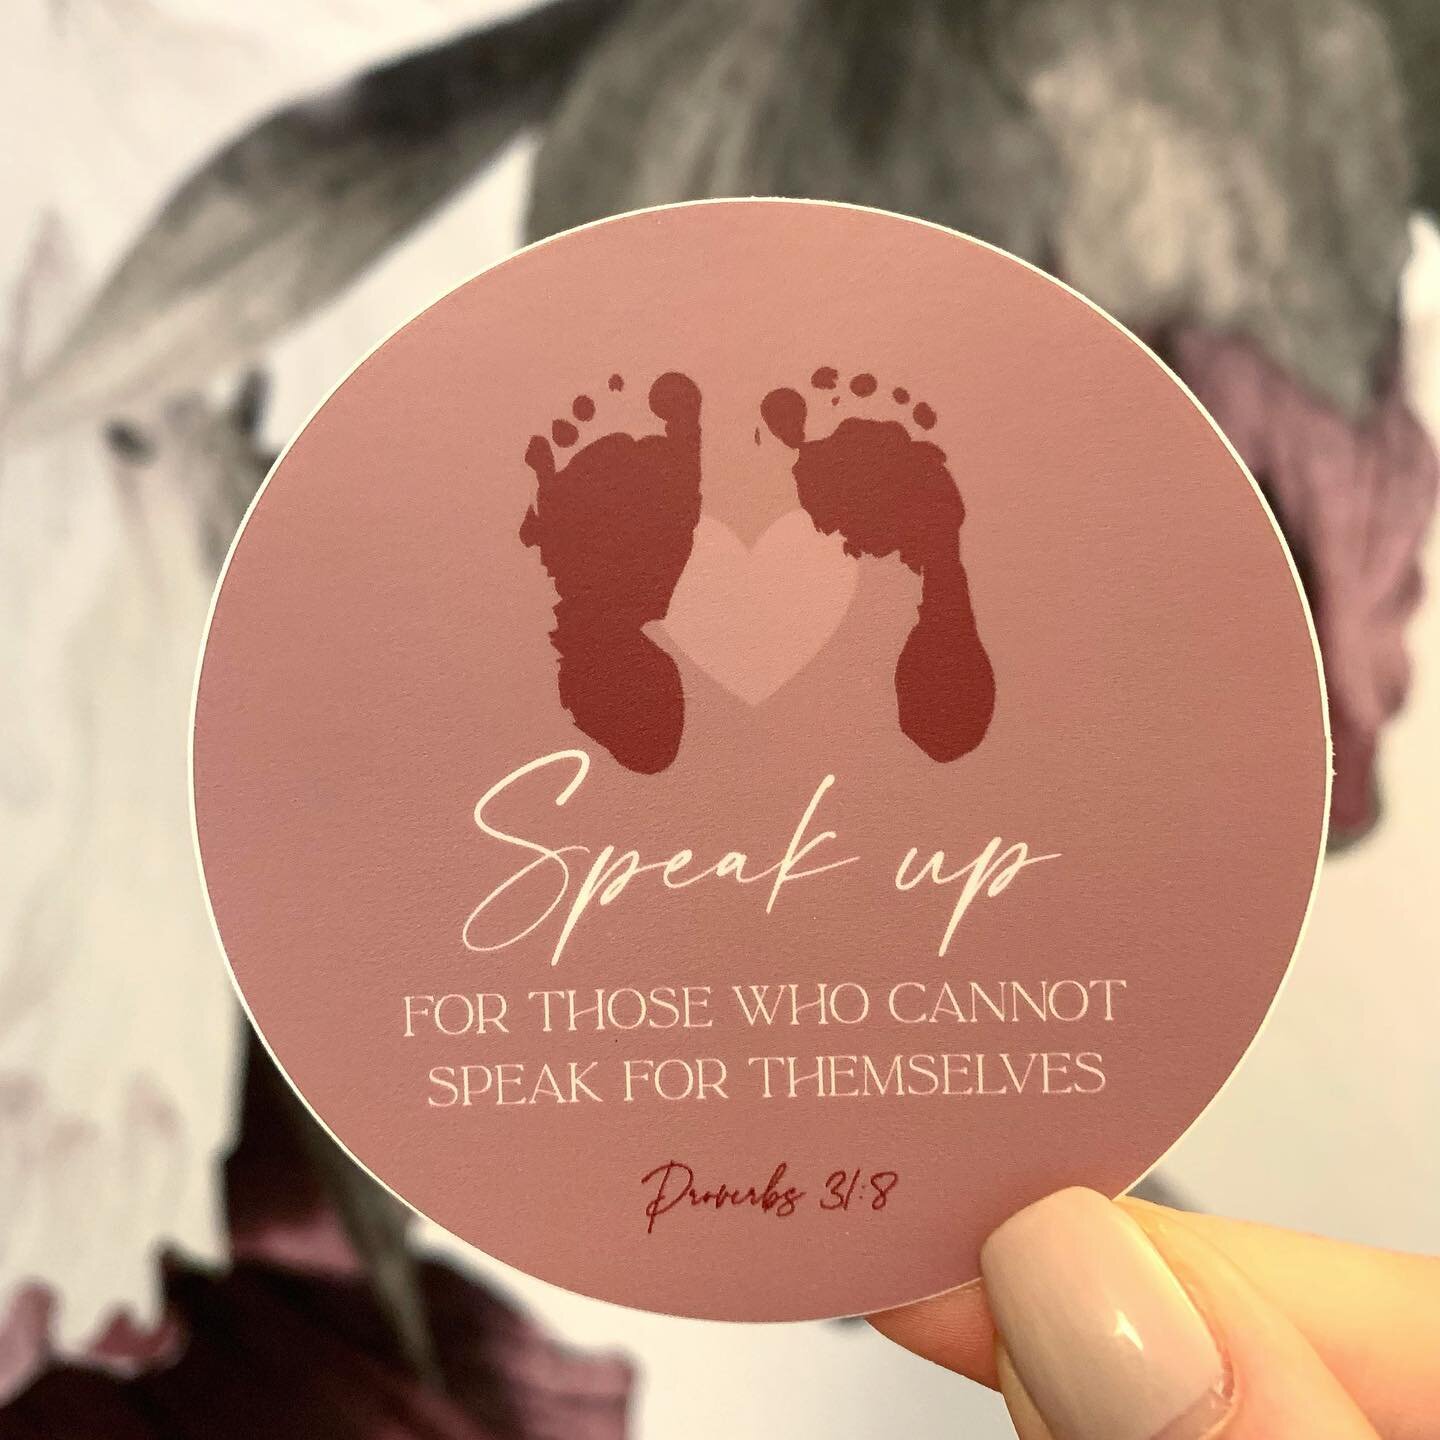 These are back in stock! Tap to shop or buy through Etsy for the $0.55 shipping option. #prolifegeneration 🤍
.
.
.
.
.
.
.
.
.
.
.
.
.
#prolife #prolifesticker #babies #lovebabies #speakup #artist #creative #colorado #shopcolorado #coloradosprings #